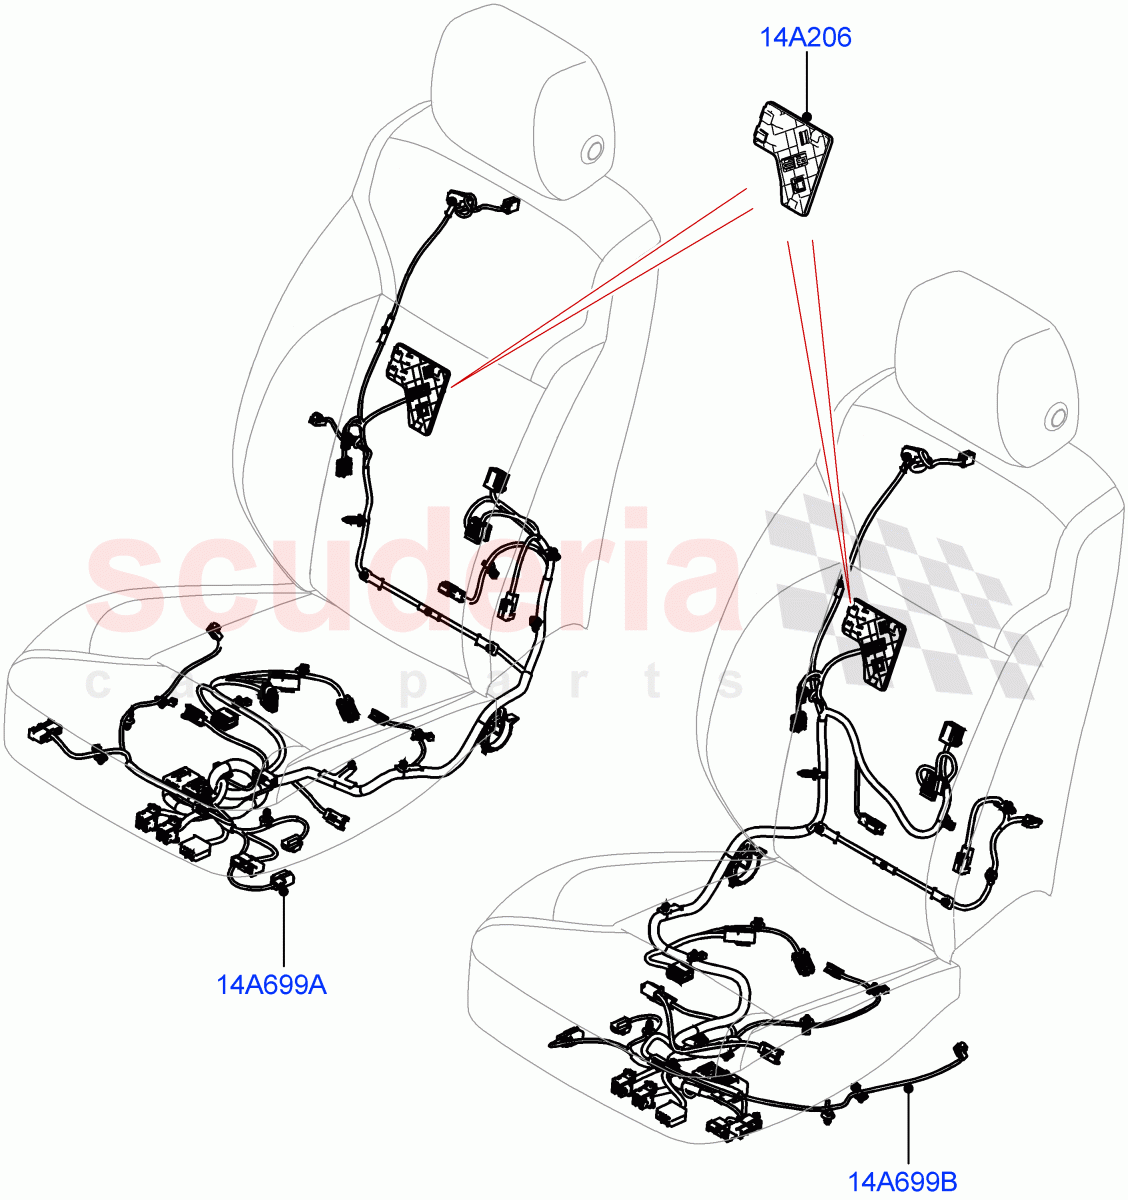 Wiring - Seats(Front Seats)((V)FROMMA000001) of Land Rover Land Rover Range Rover Velar (2017+) [2.0 Turbo Diesel]